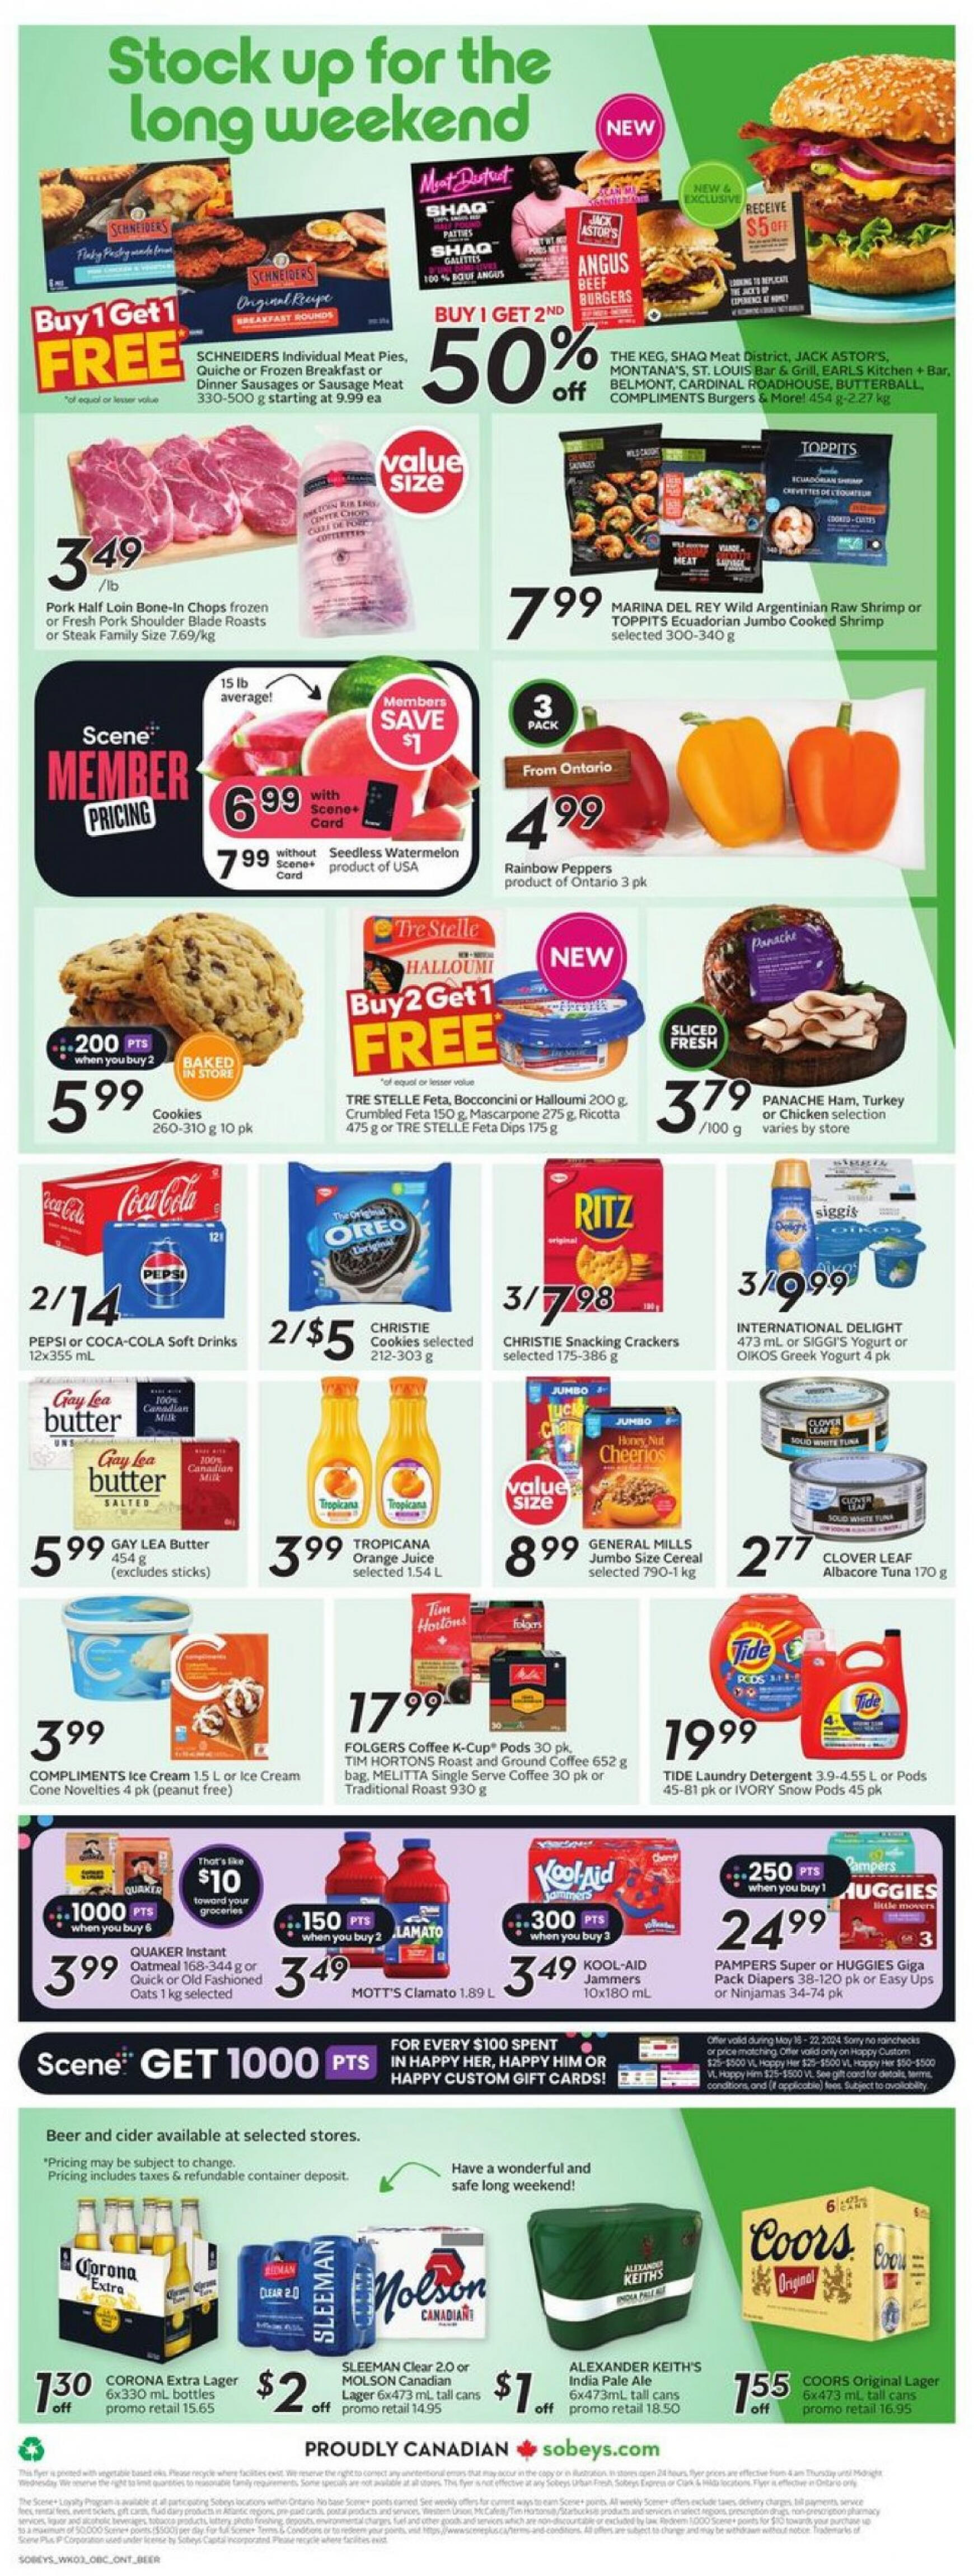 sobeys - Sobeys - Weekly Flyer - Ontario flyer current 16.05. - 22.05. - page: 4